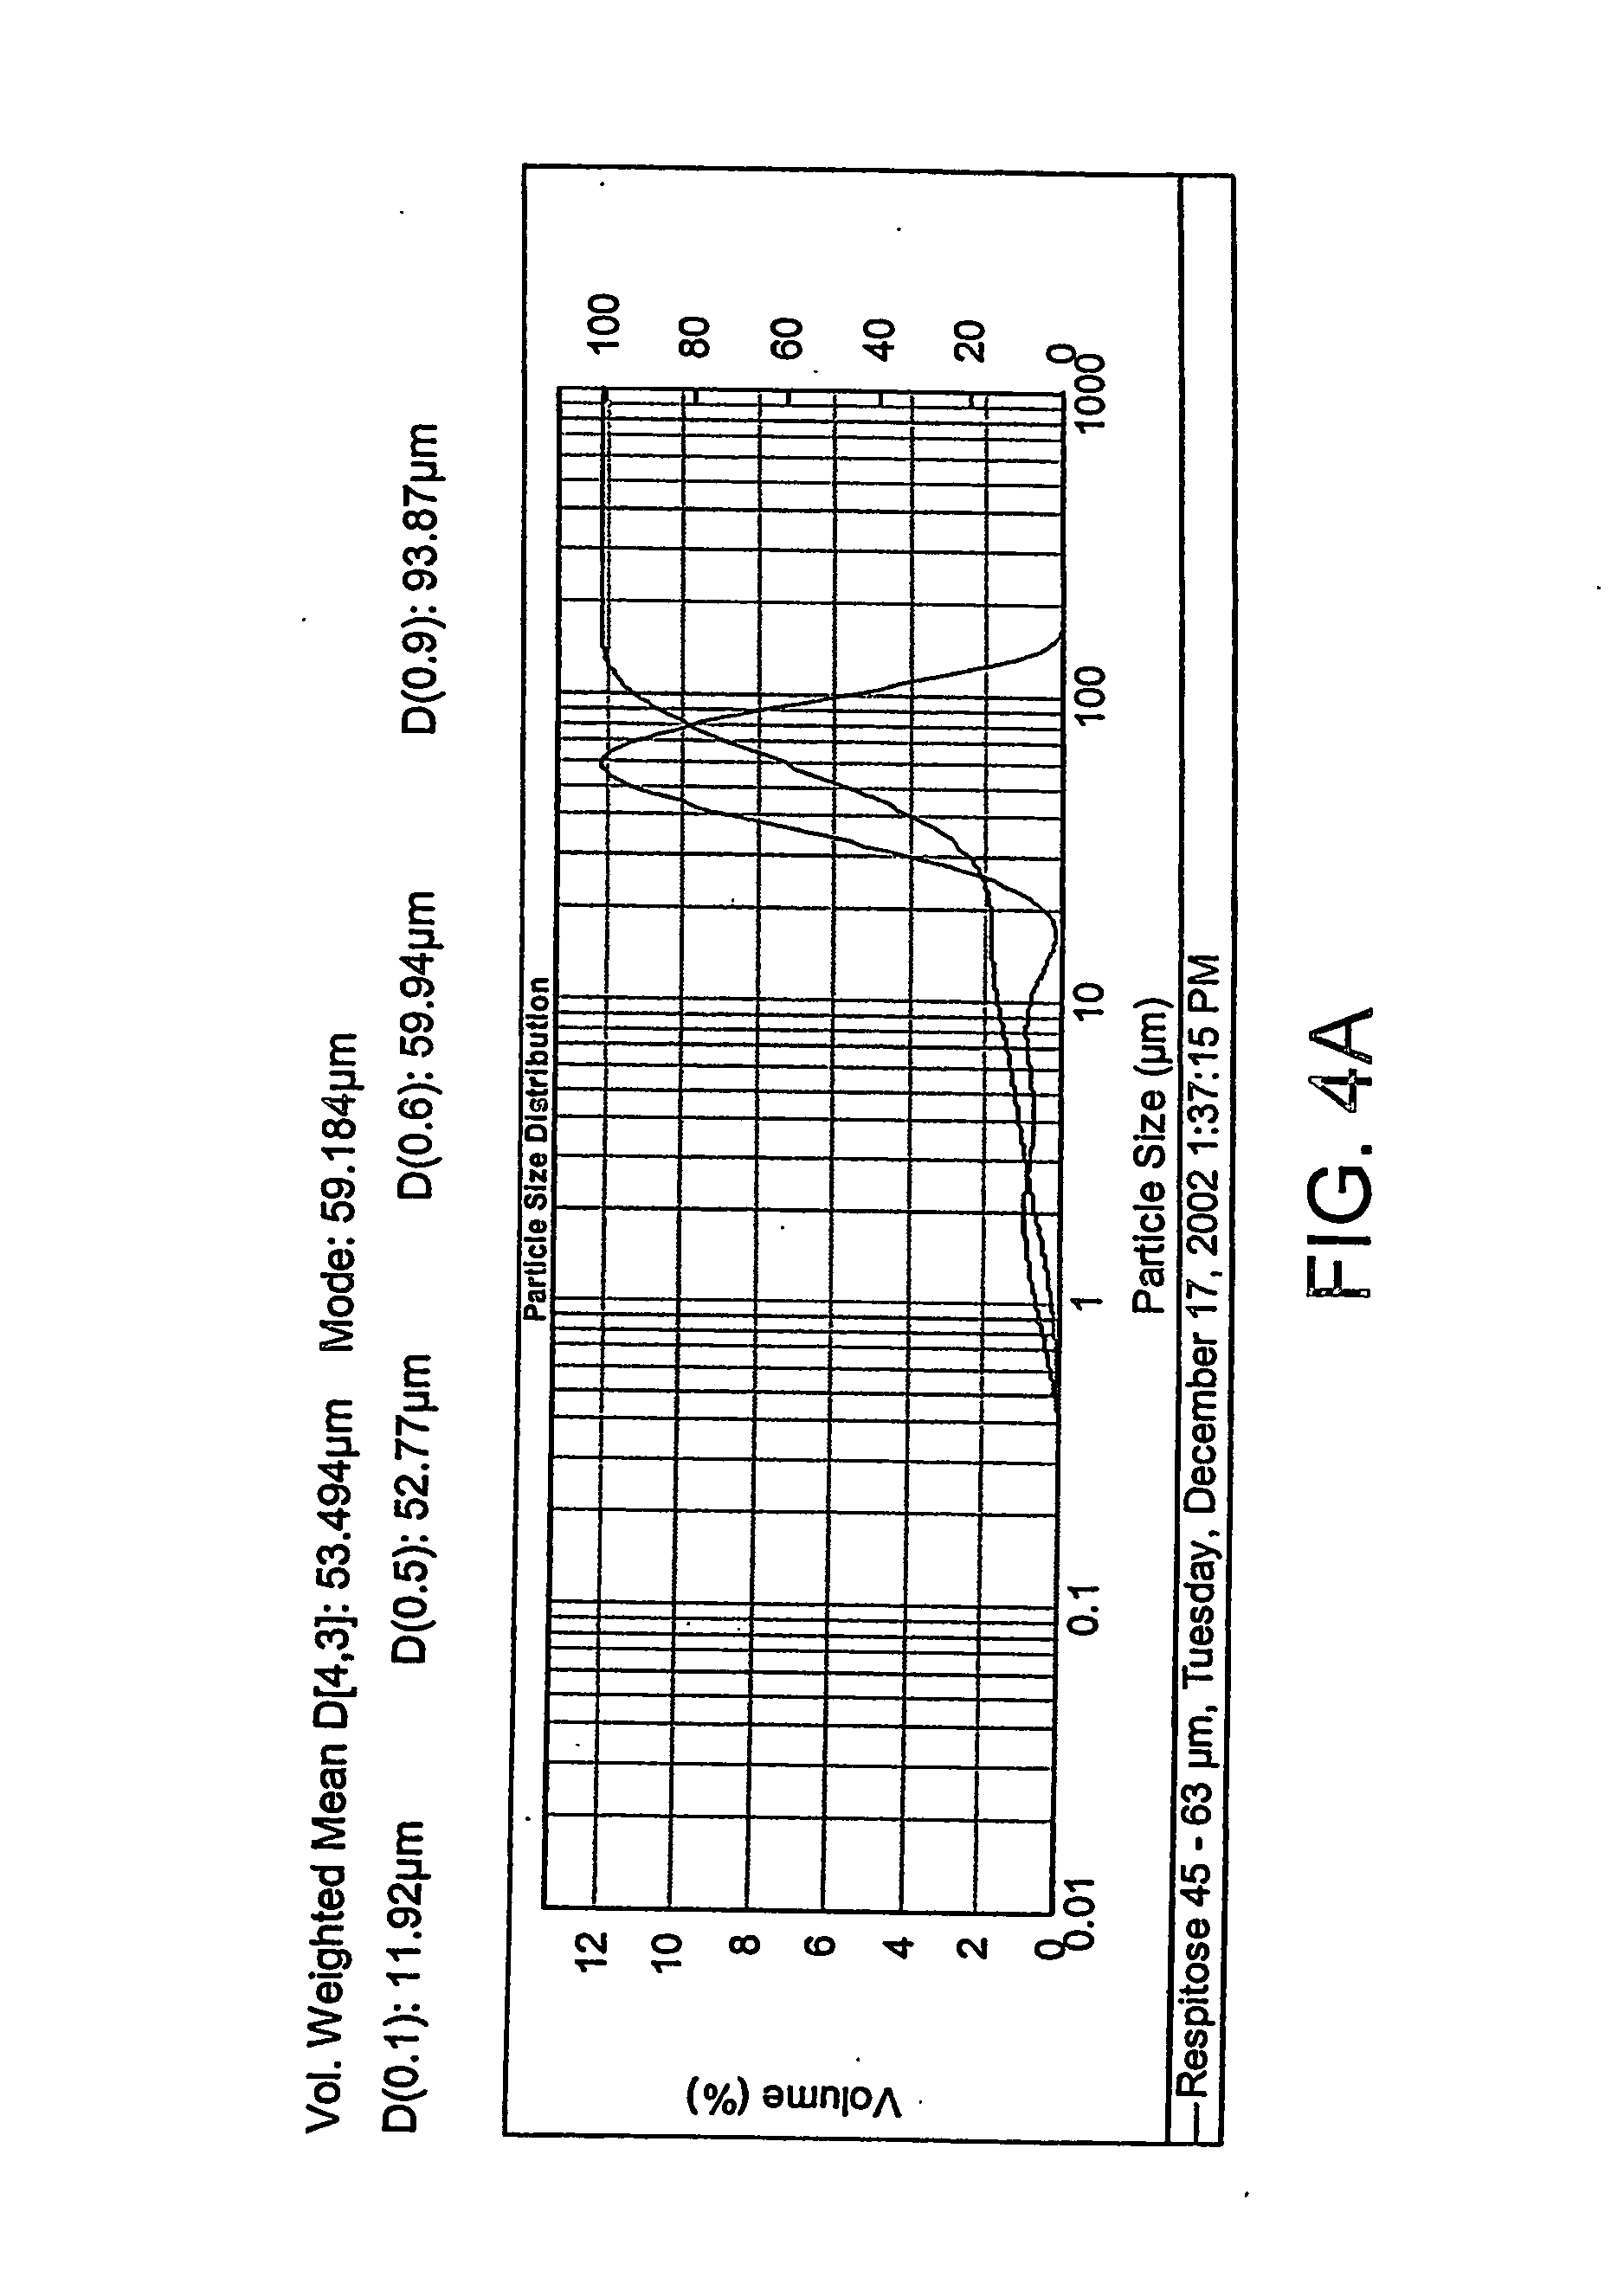 Pharmaceutical compositions comprising apomorphine for pulmonary inhalation